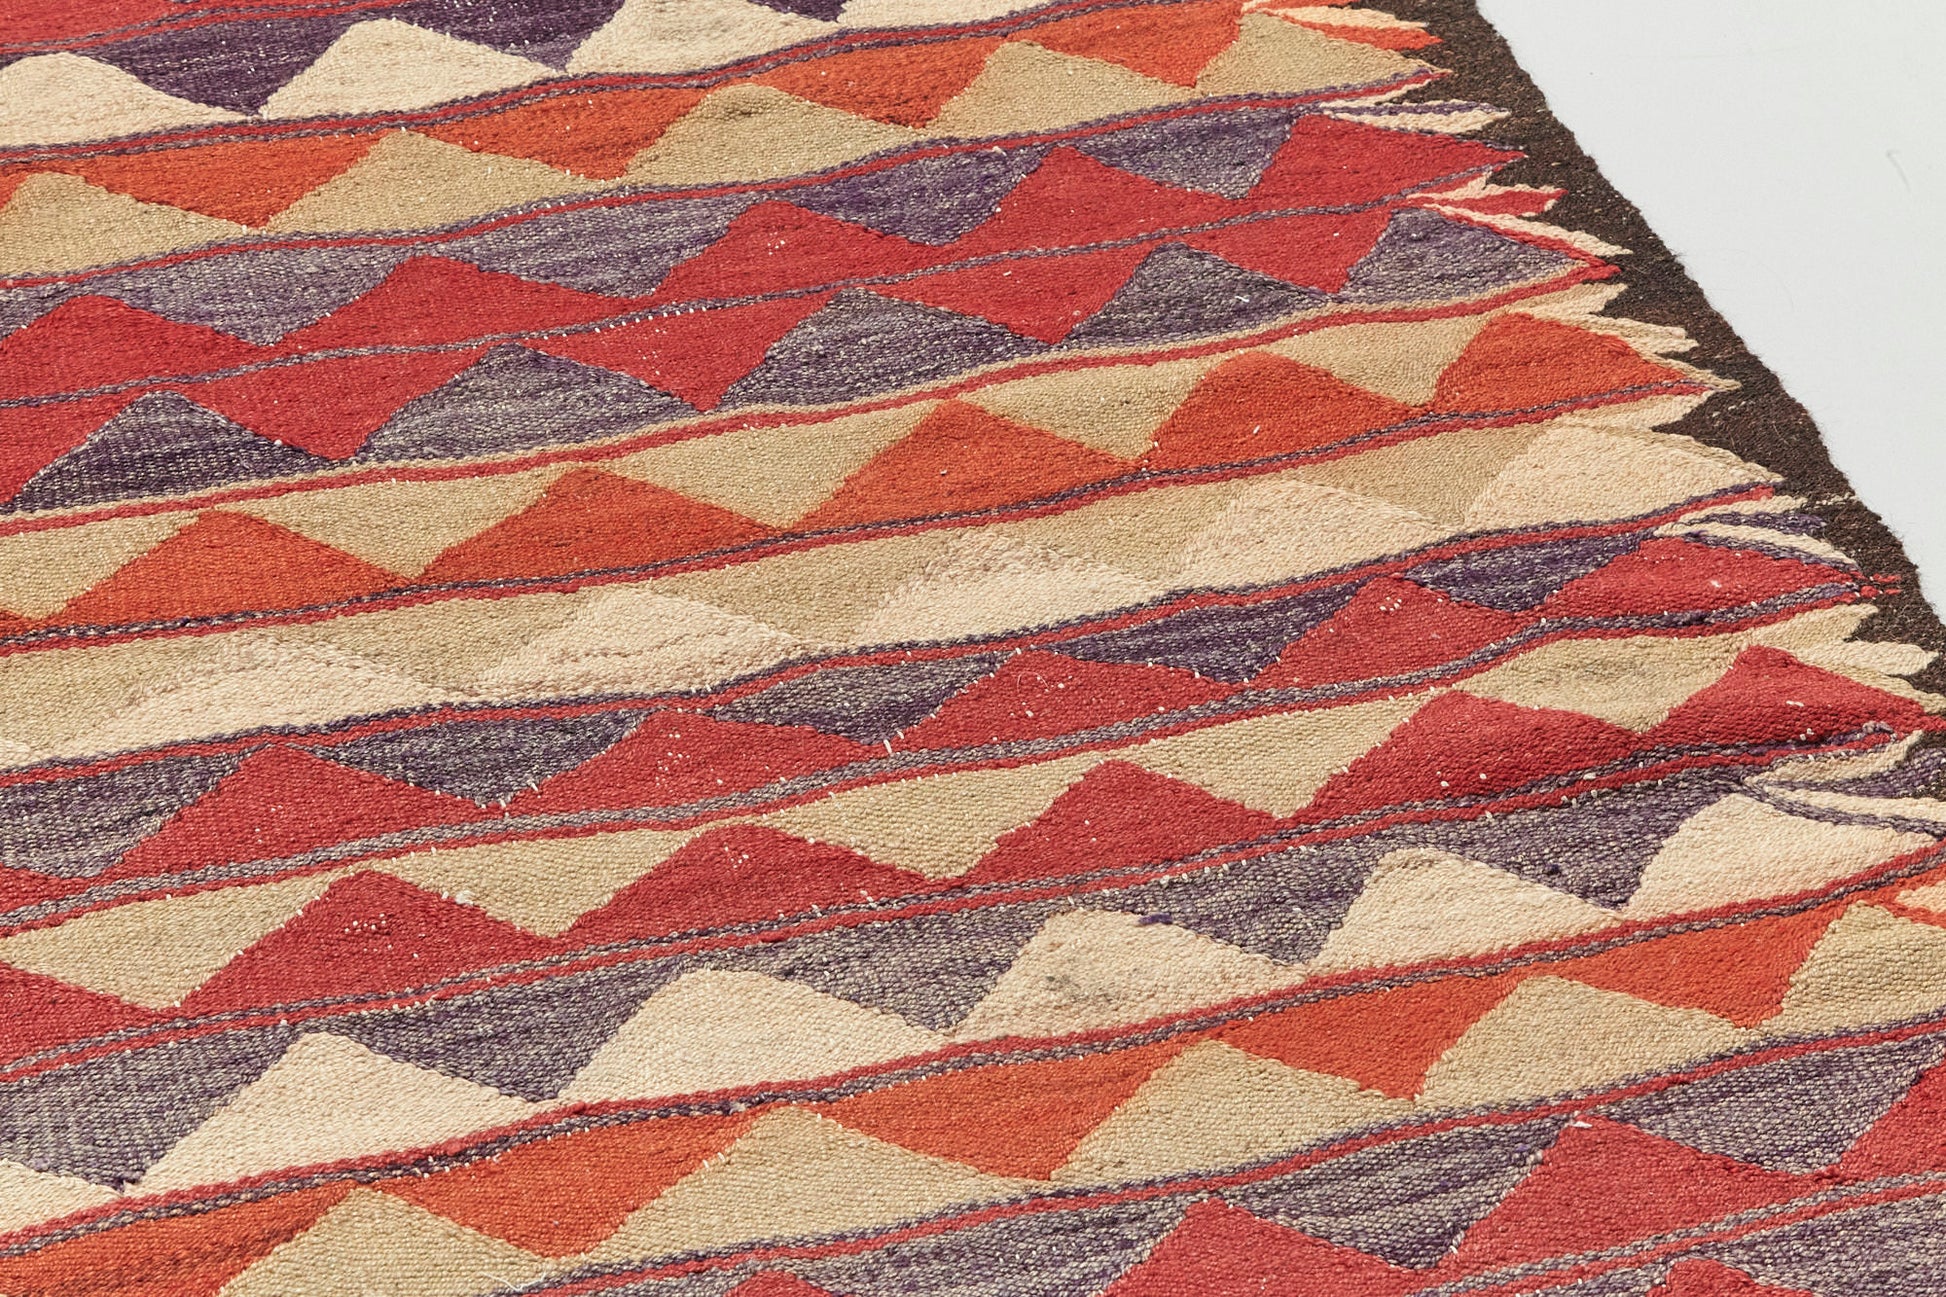 Hand woven flat weave Kilim Turkish Rug with beige, red and grey triangle shapes - Perfect for bedroom, kitchen, dining or living room rug - Available from King Kennedy Rugs Los Angeles